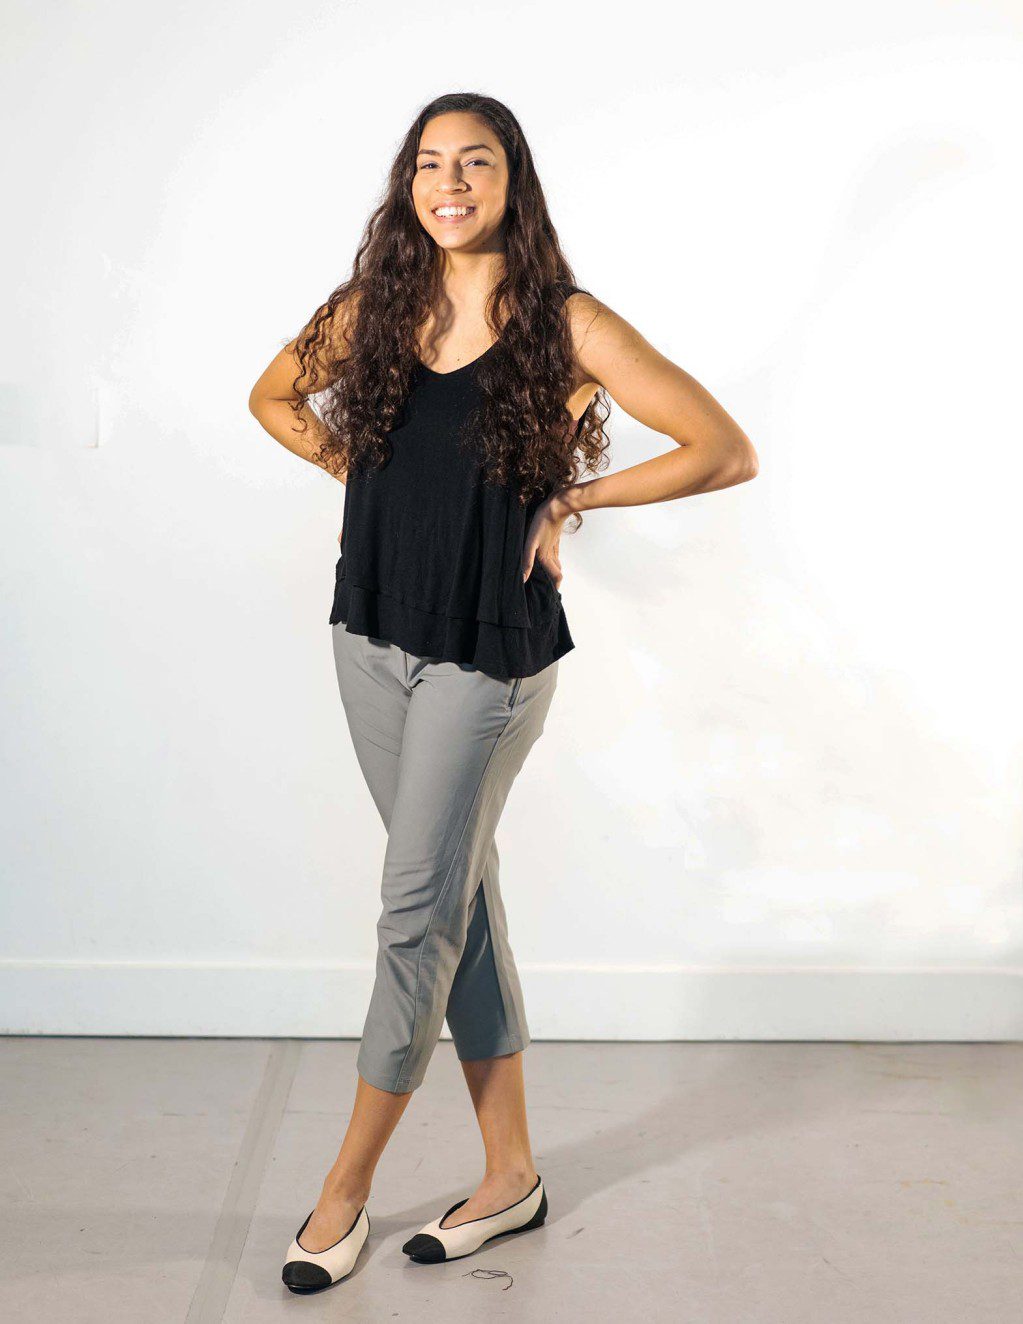 Zara smiles for the camera; she has long brown curly hair, brown eyes and skin, wearing a black top, olive green pants and ballet flats. She poses with two hands on her hips and legs crossed.